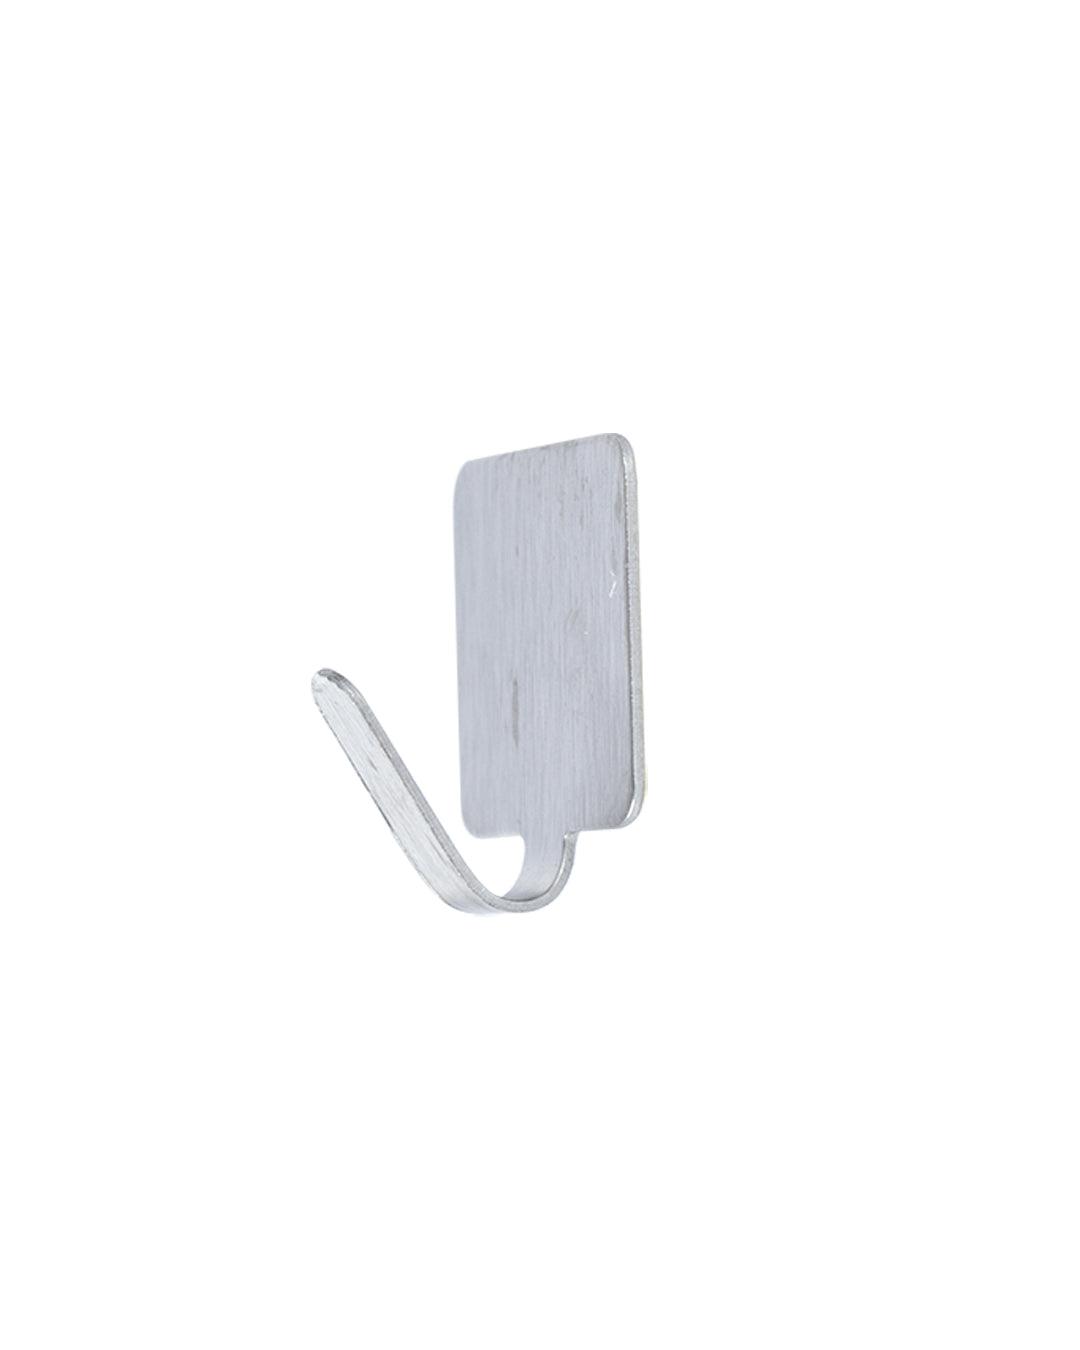 Buy Metal Sticky Hooks, Self Adhesive Back, Silver, Stainless